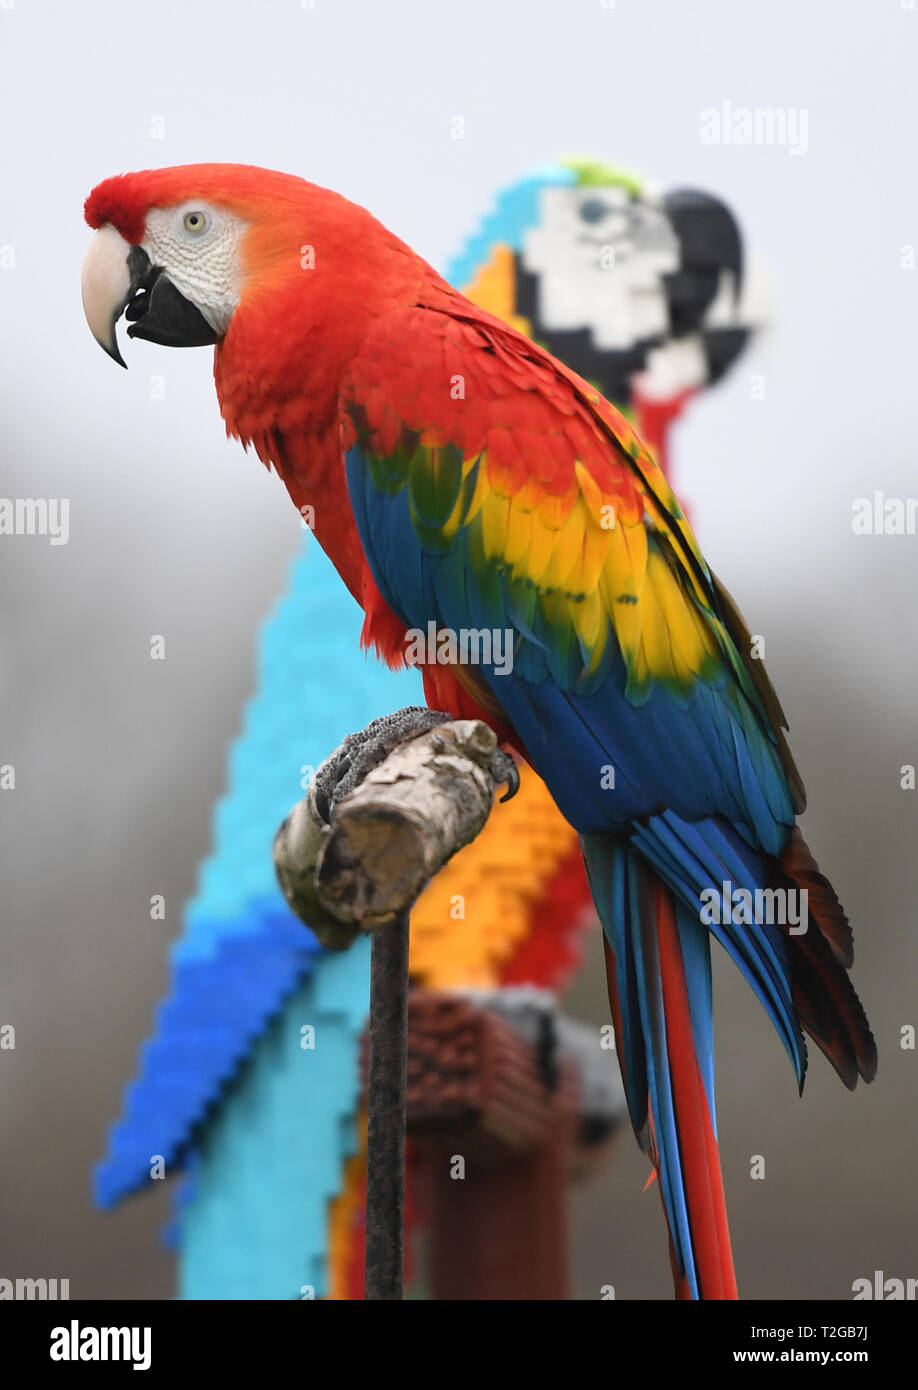 Inca A Scarlet Macaw Comes Face To Face With Polina And Pearl A Life Size Sculpture Of A Scarlet Macaw And A Blue And Gold Macaw Constructed From 1 800 Lego Bricks At Zsl Whipsnade Zoo,Homemade Meatloaf